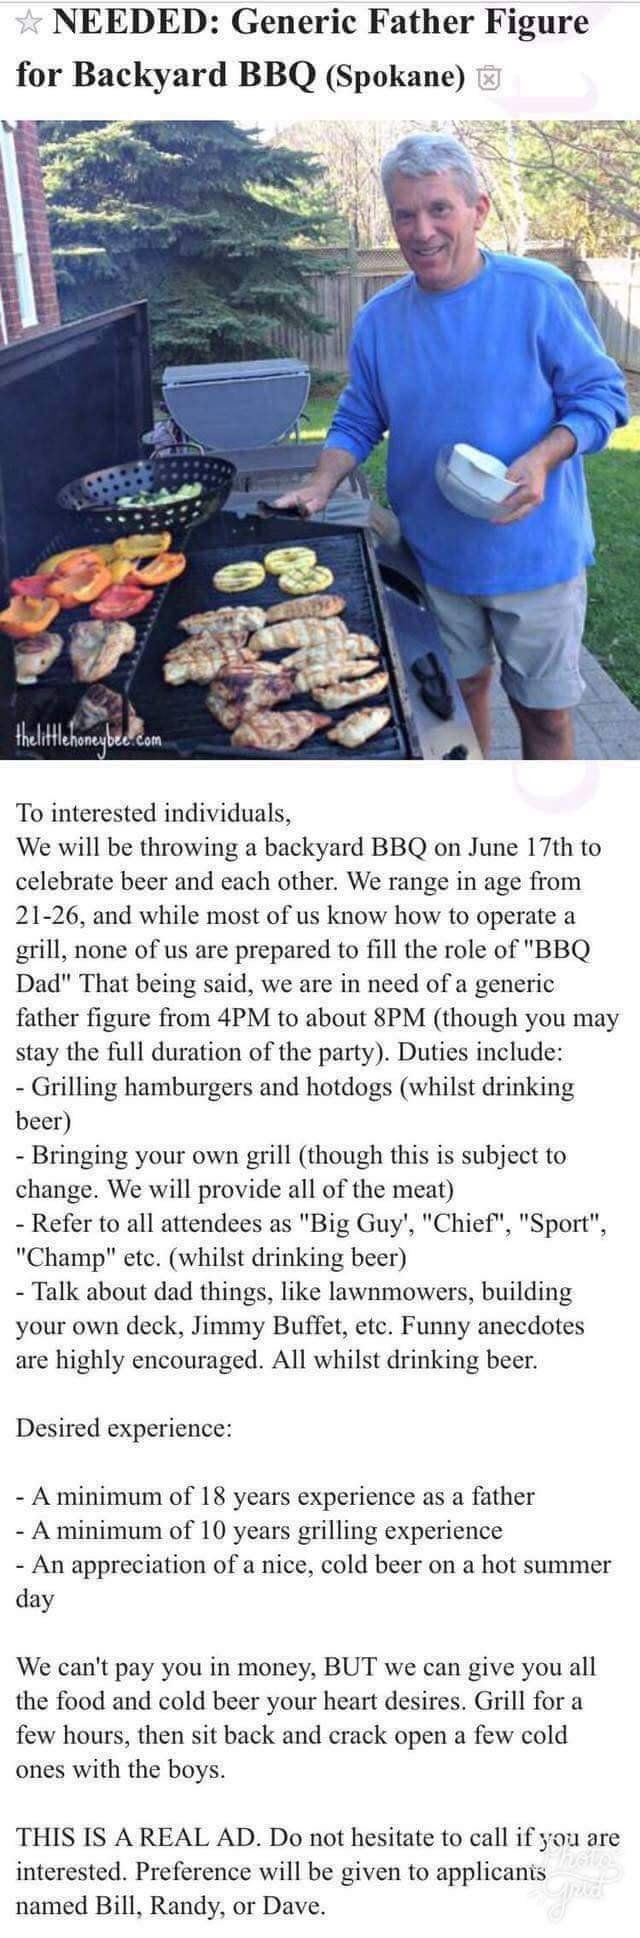 An ad for a BBQ Dad